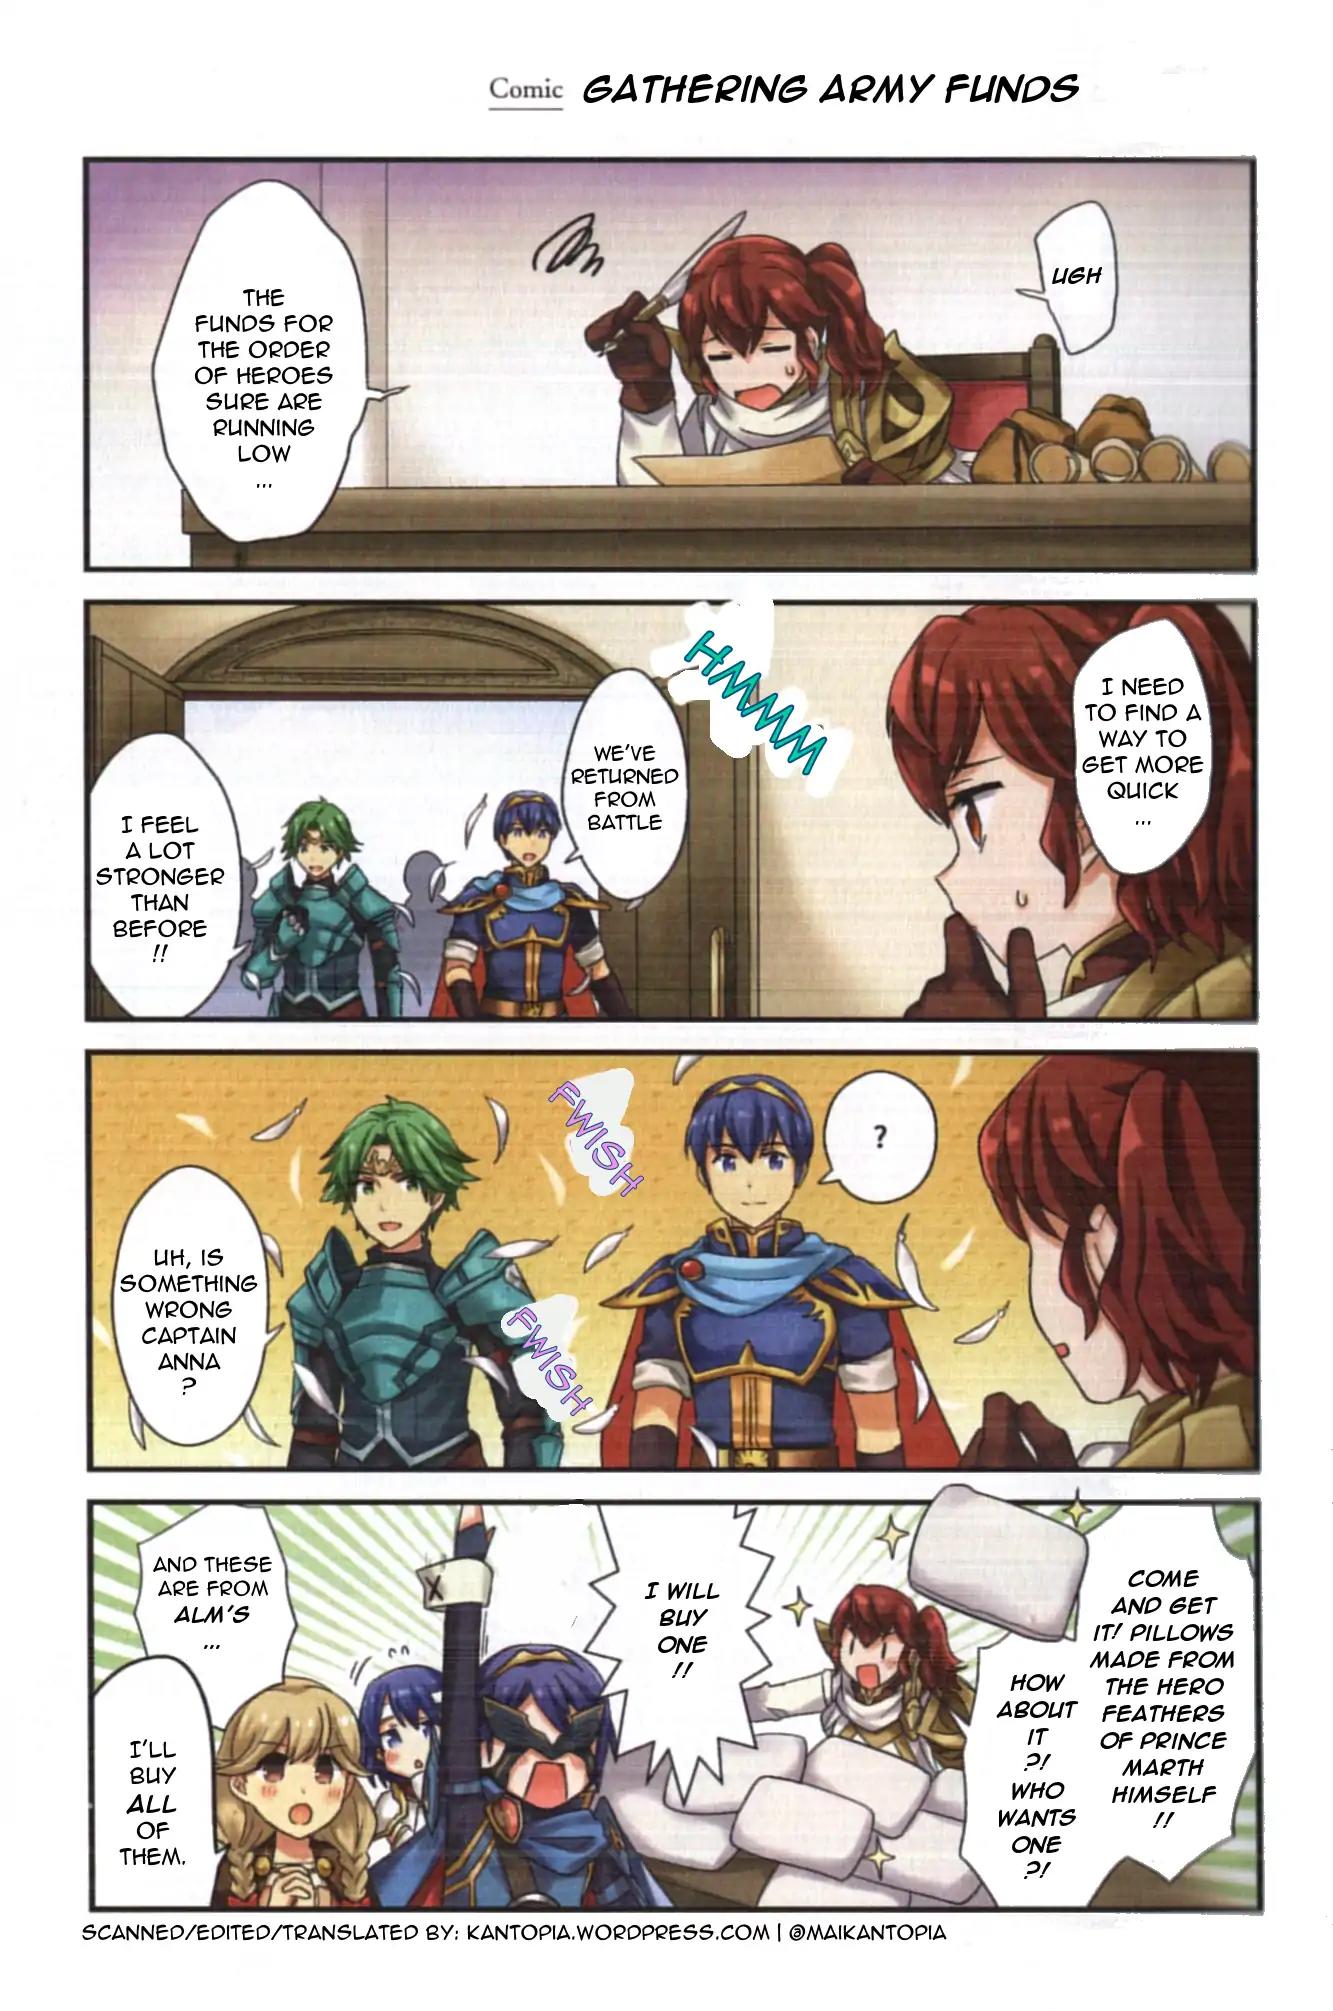 Fire Emblem Heroes Daily Lives of the Heroes Vol.1 Chapter 0.04: Character comic: